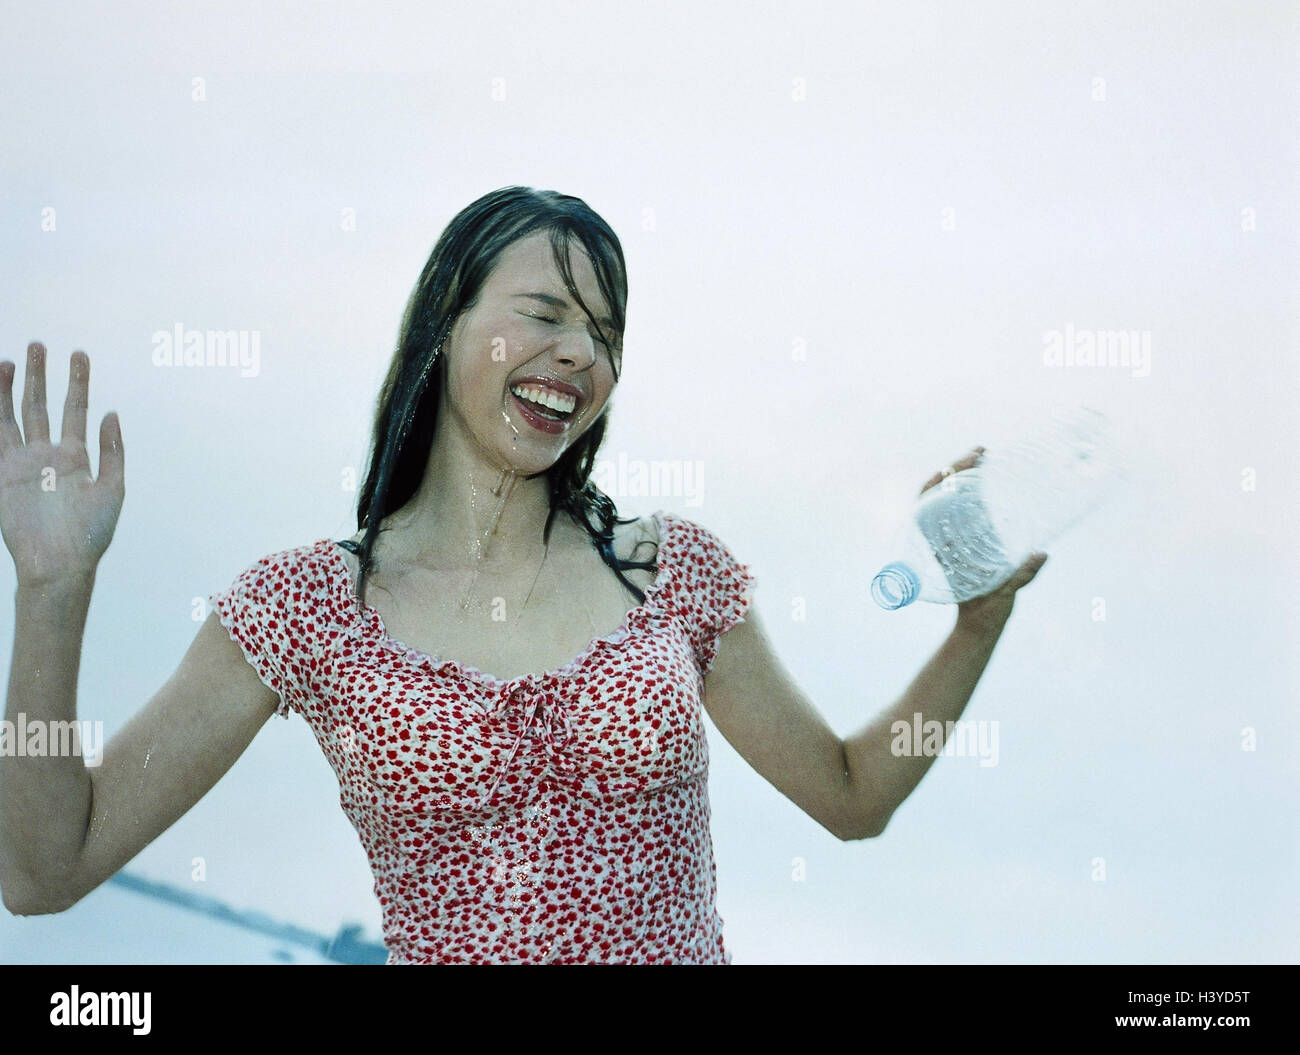 Woman, water Bottle, emptied, look, wet, gesture, half portrait, beach, vacation, leisure time, young, Bottle, water, blank, refreshment, cooling, fun, laugh, joke melted, cheerfulness, cheerfully, amusements, happy, stupidly, lifestyle, outside, very clo Stock Photo